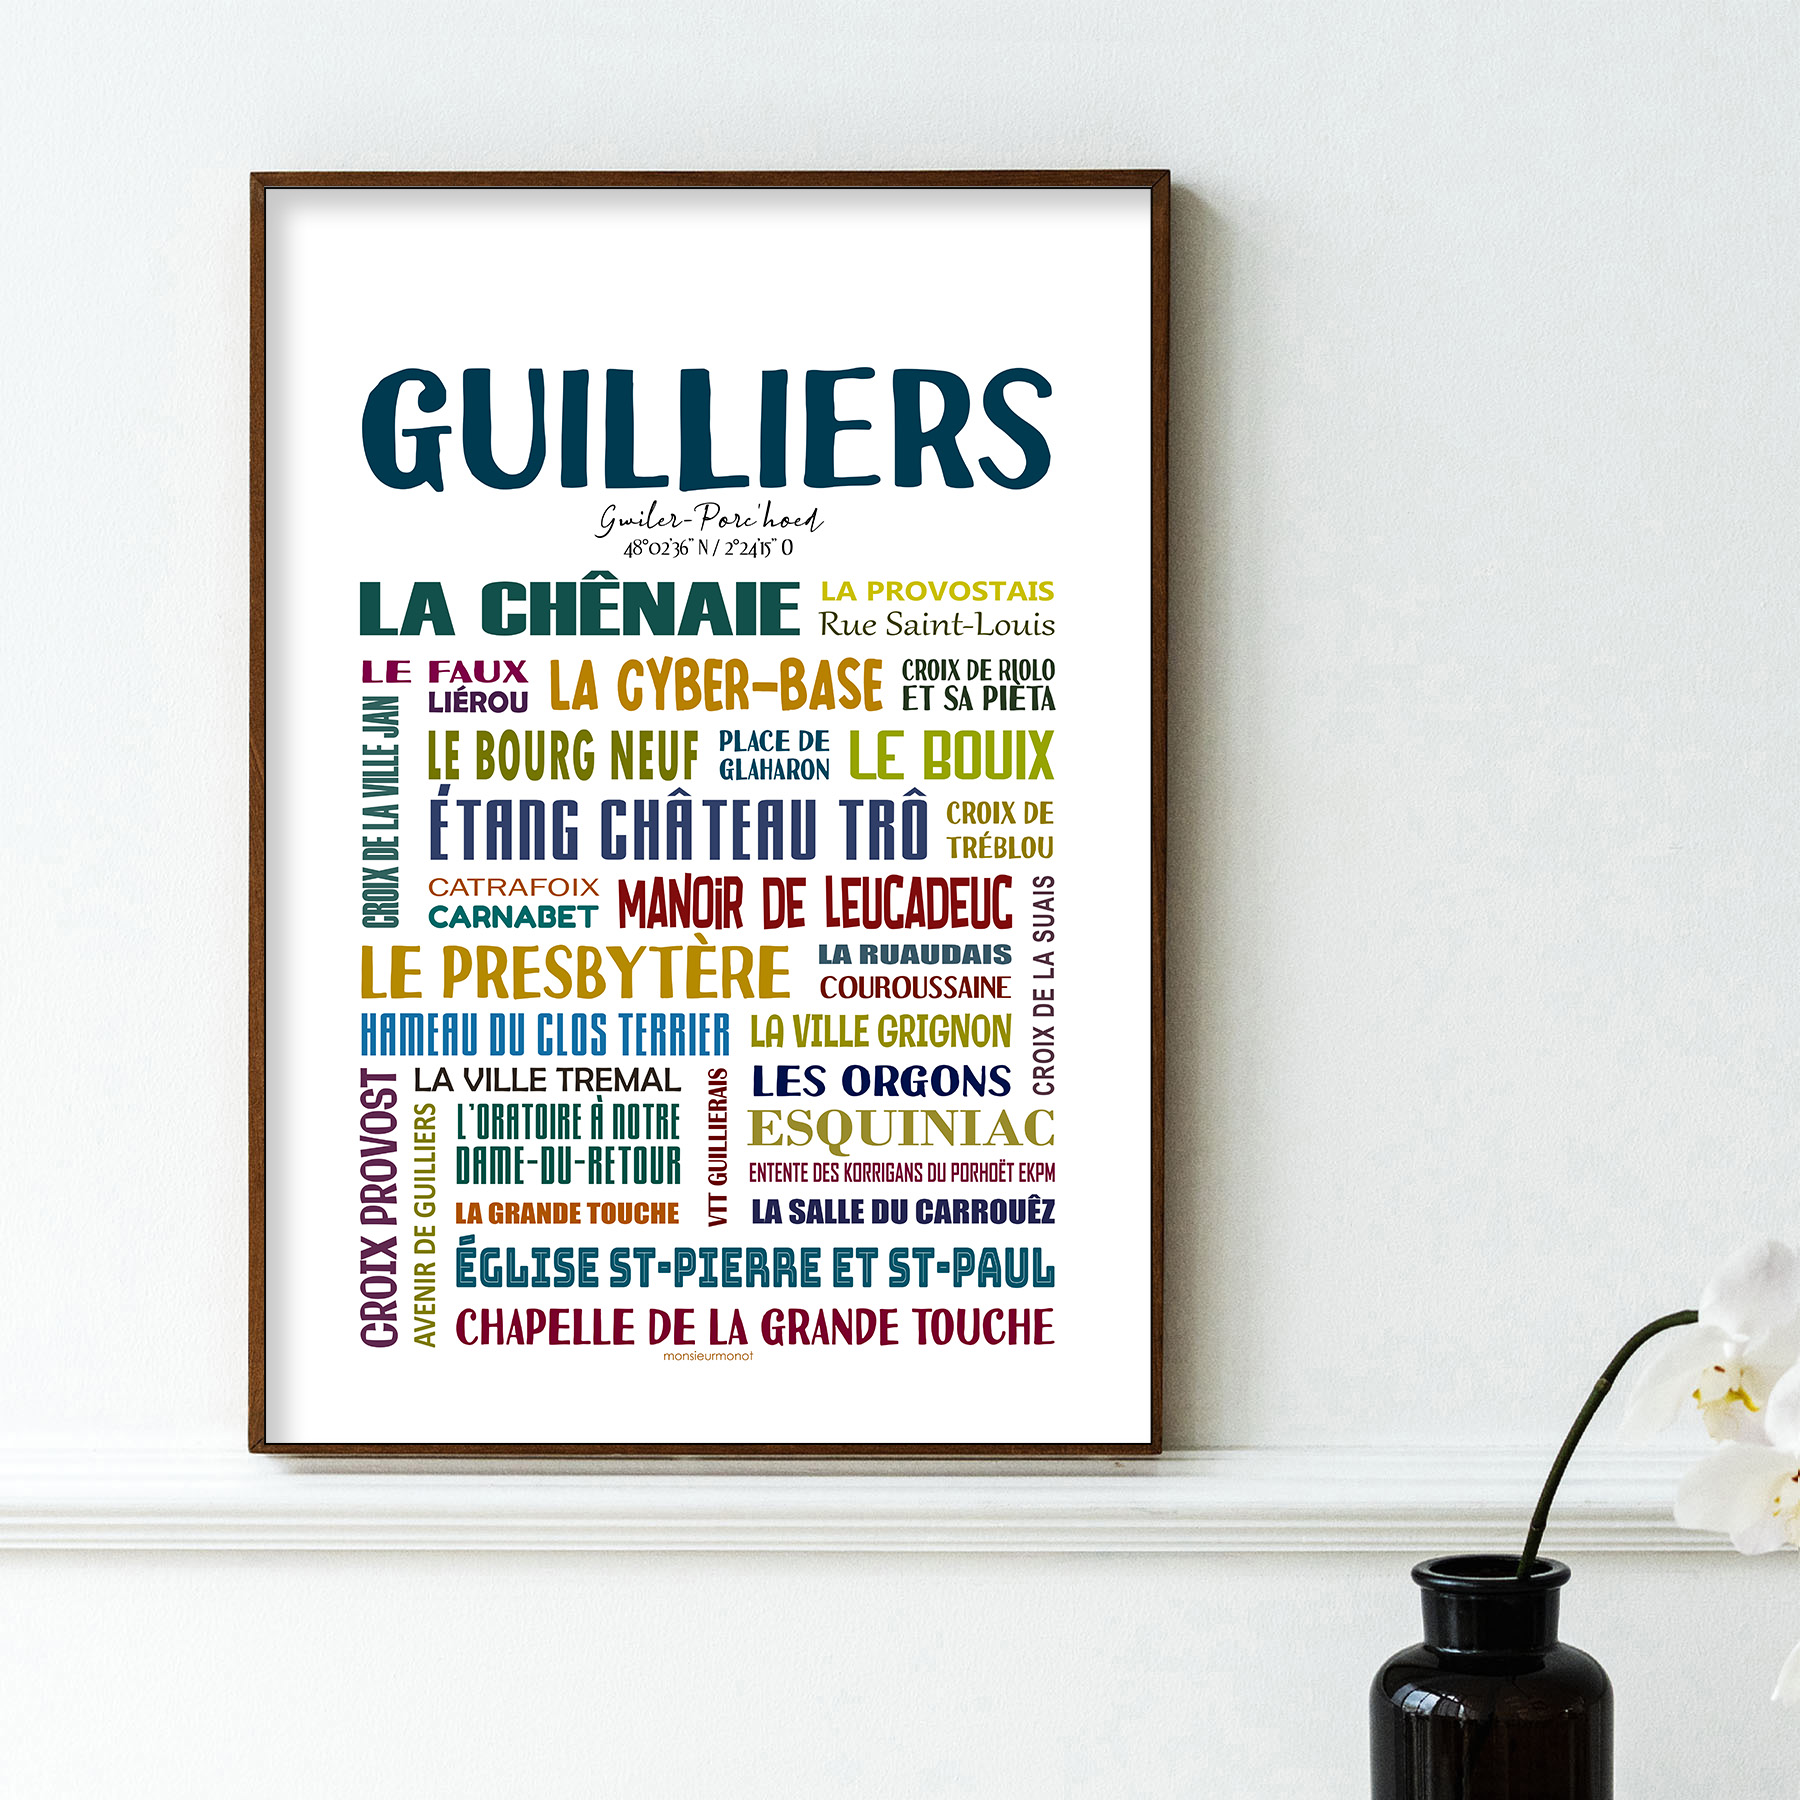 Guilliers